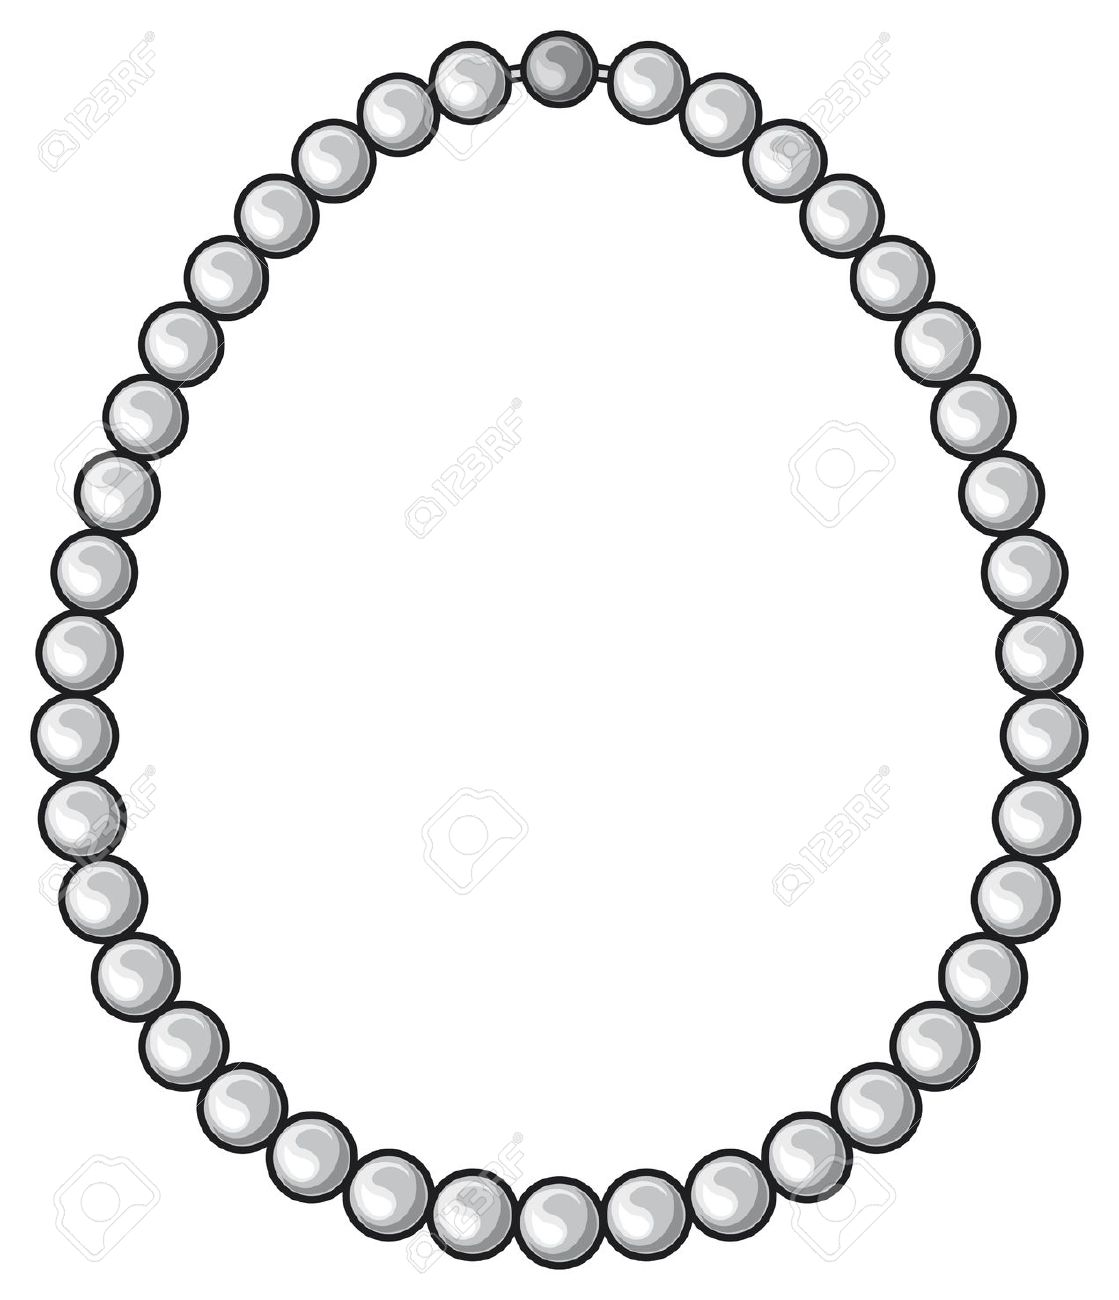 1569 Necklace free clipart.